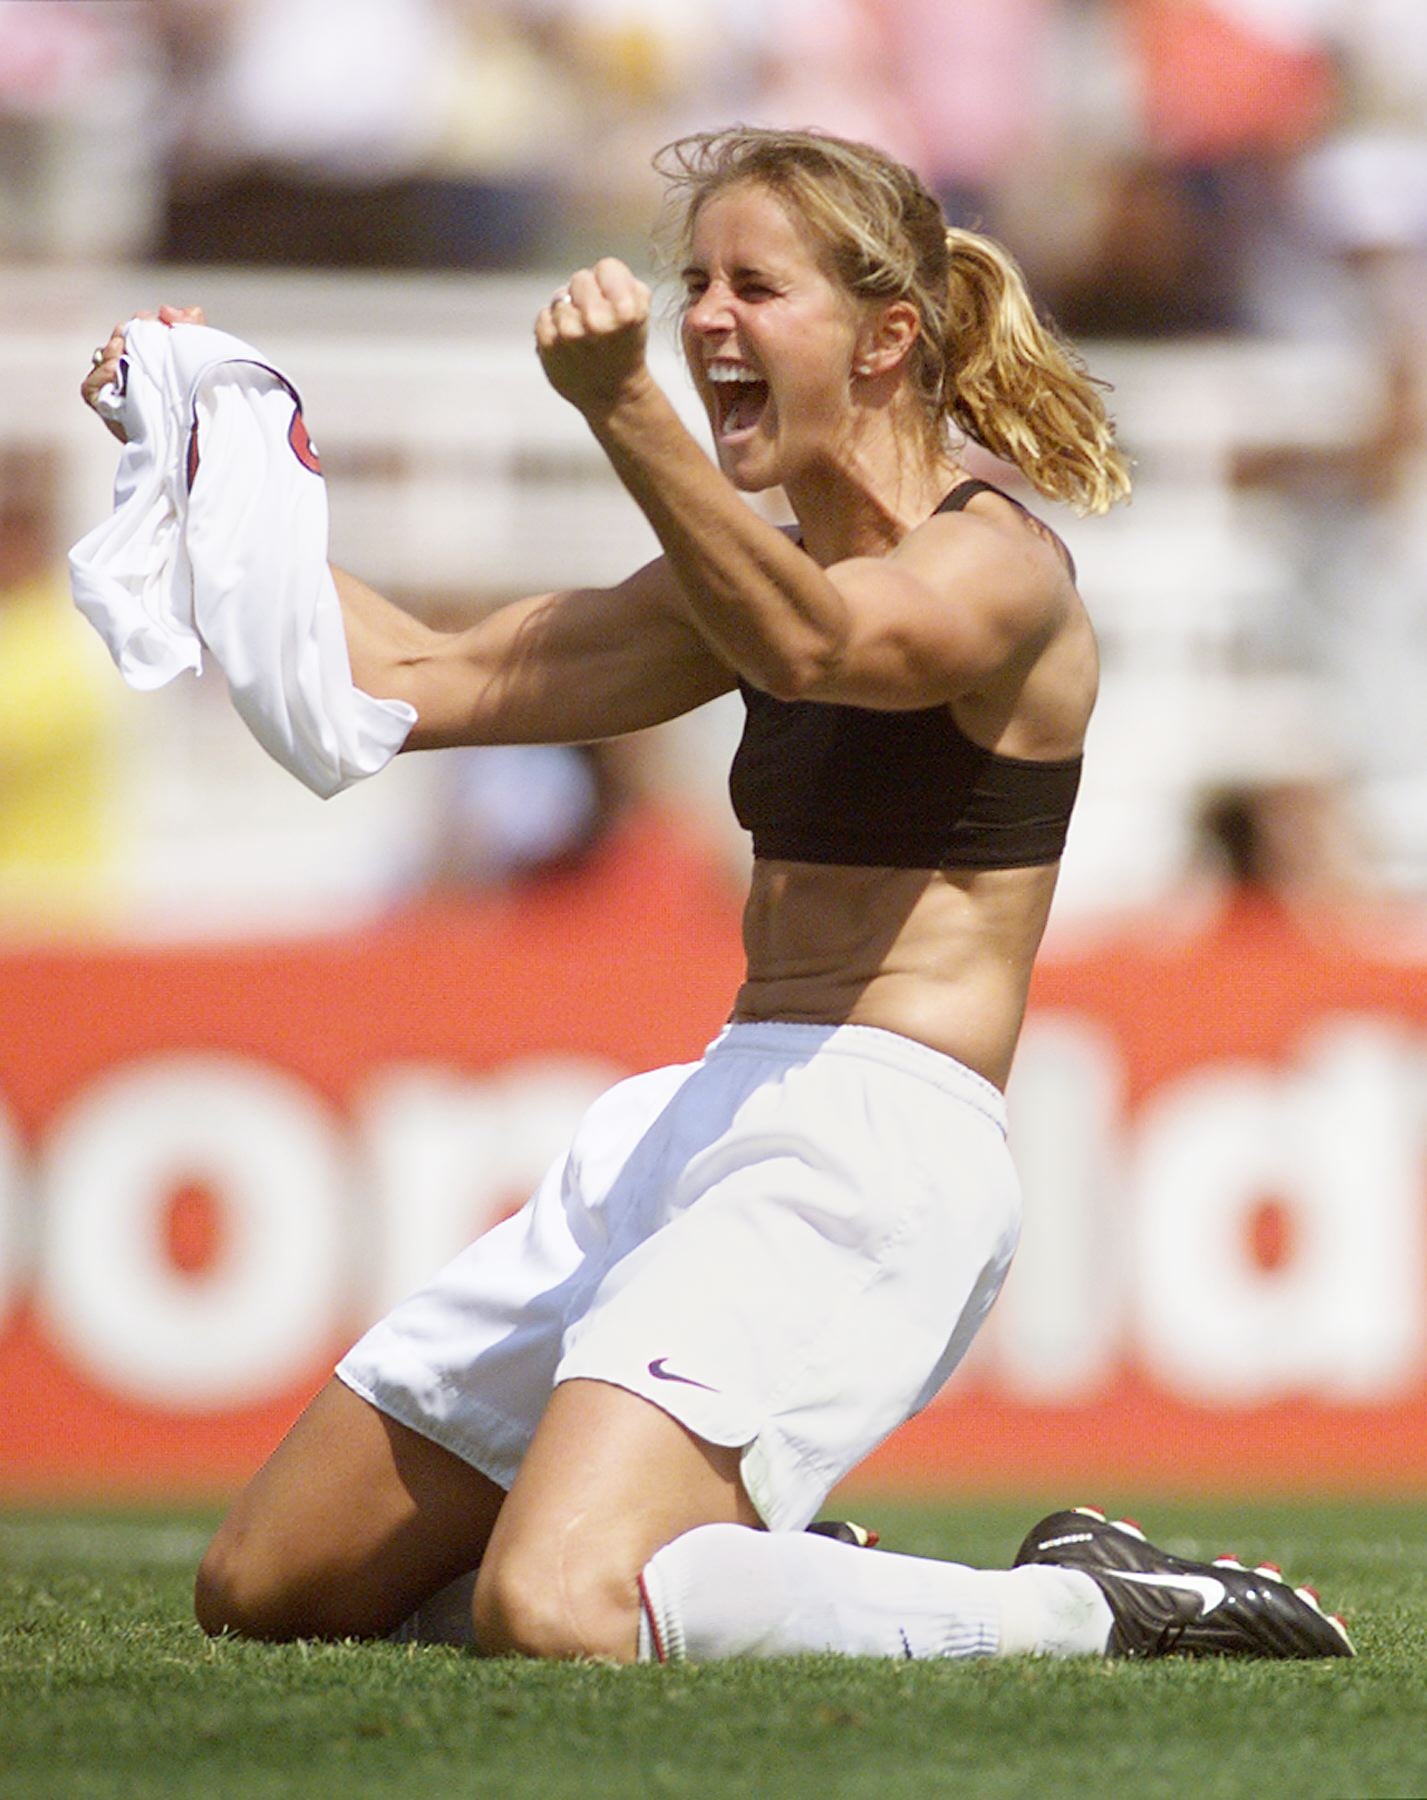 PASADENA, :  Brandi Chastain of the US celebrates after kicking the winning penalty kick to win the 1999 Women's World Cup final against China 10 July 1999 at the Rose Bowl in Pasadena. The US won 5-4 on penalties.  (ELECTRONIC IMAGE)   AFP PHOTO    Roberto SCHMIDT (Photo credit should read ROBERTO SCHMIDT/AFP via Getty Images)